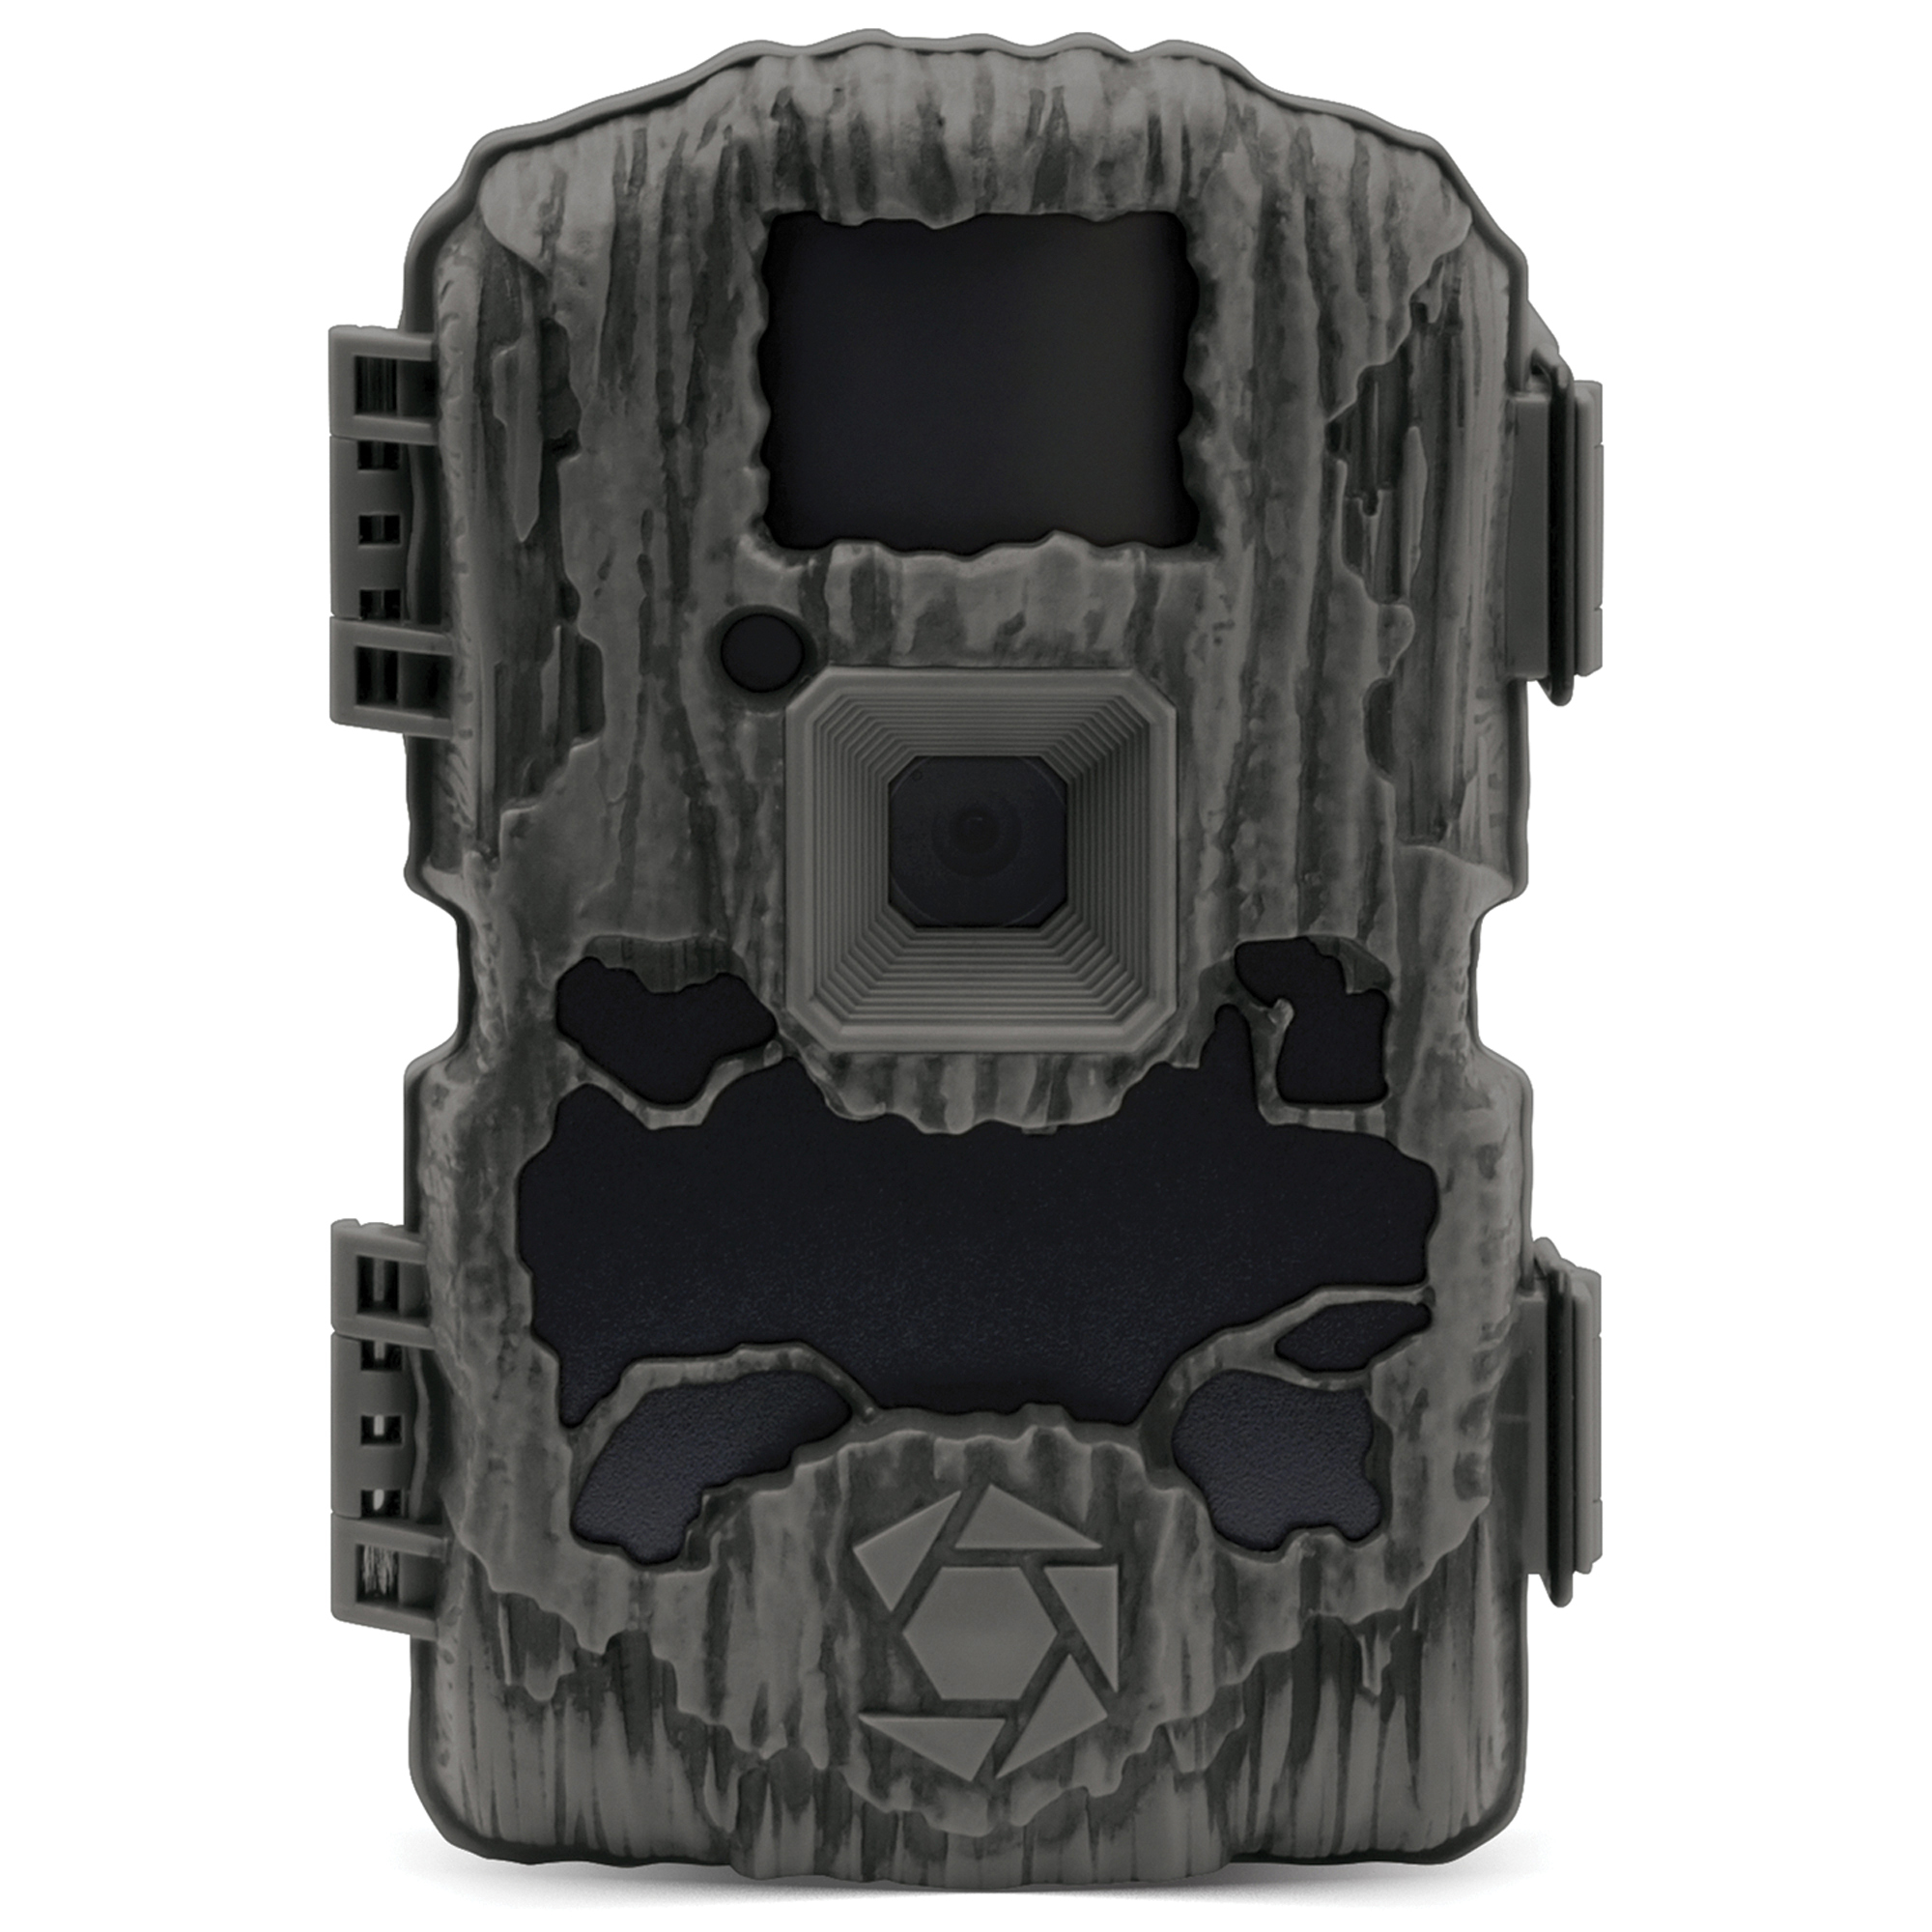 StealthCam G-Series, 1080p 32MP Vision Camera, Color Camouflage, Material Combination, Model STC-GMAX32V